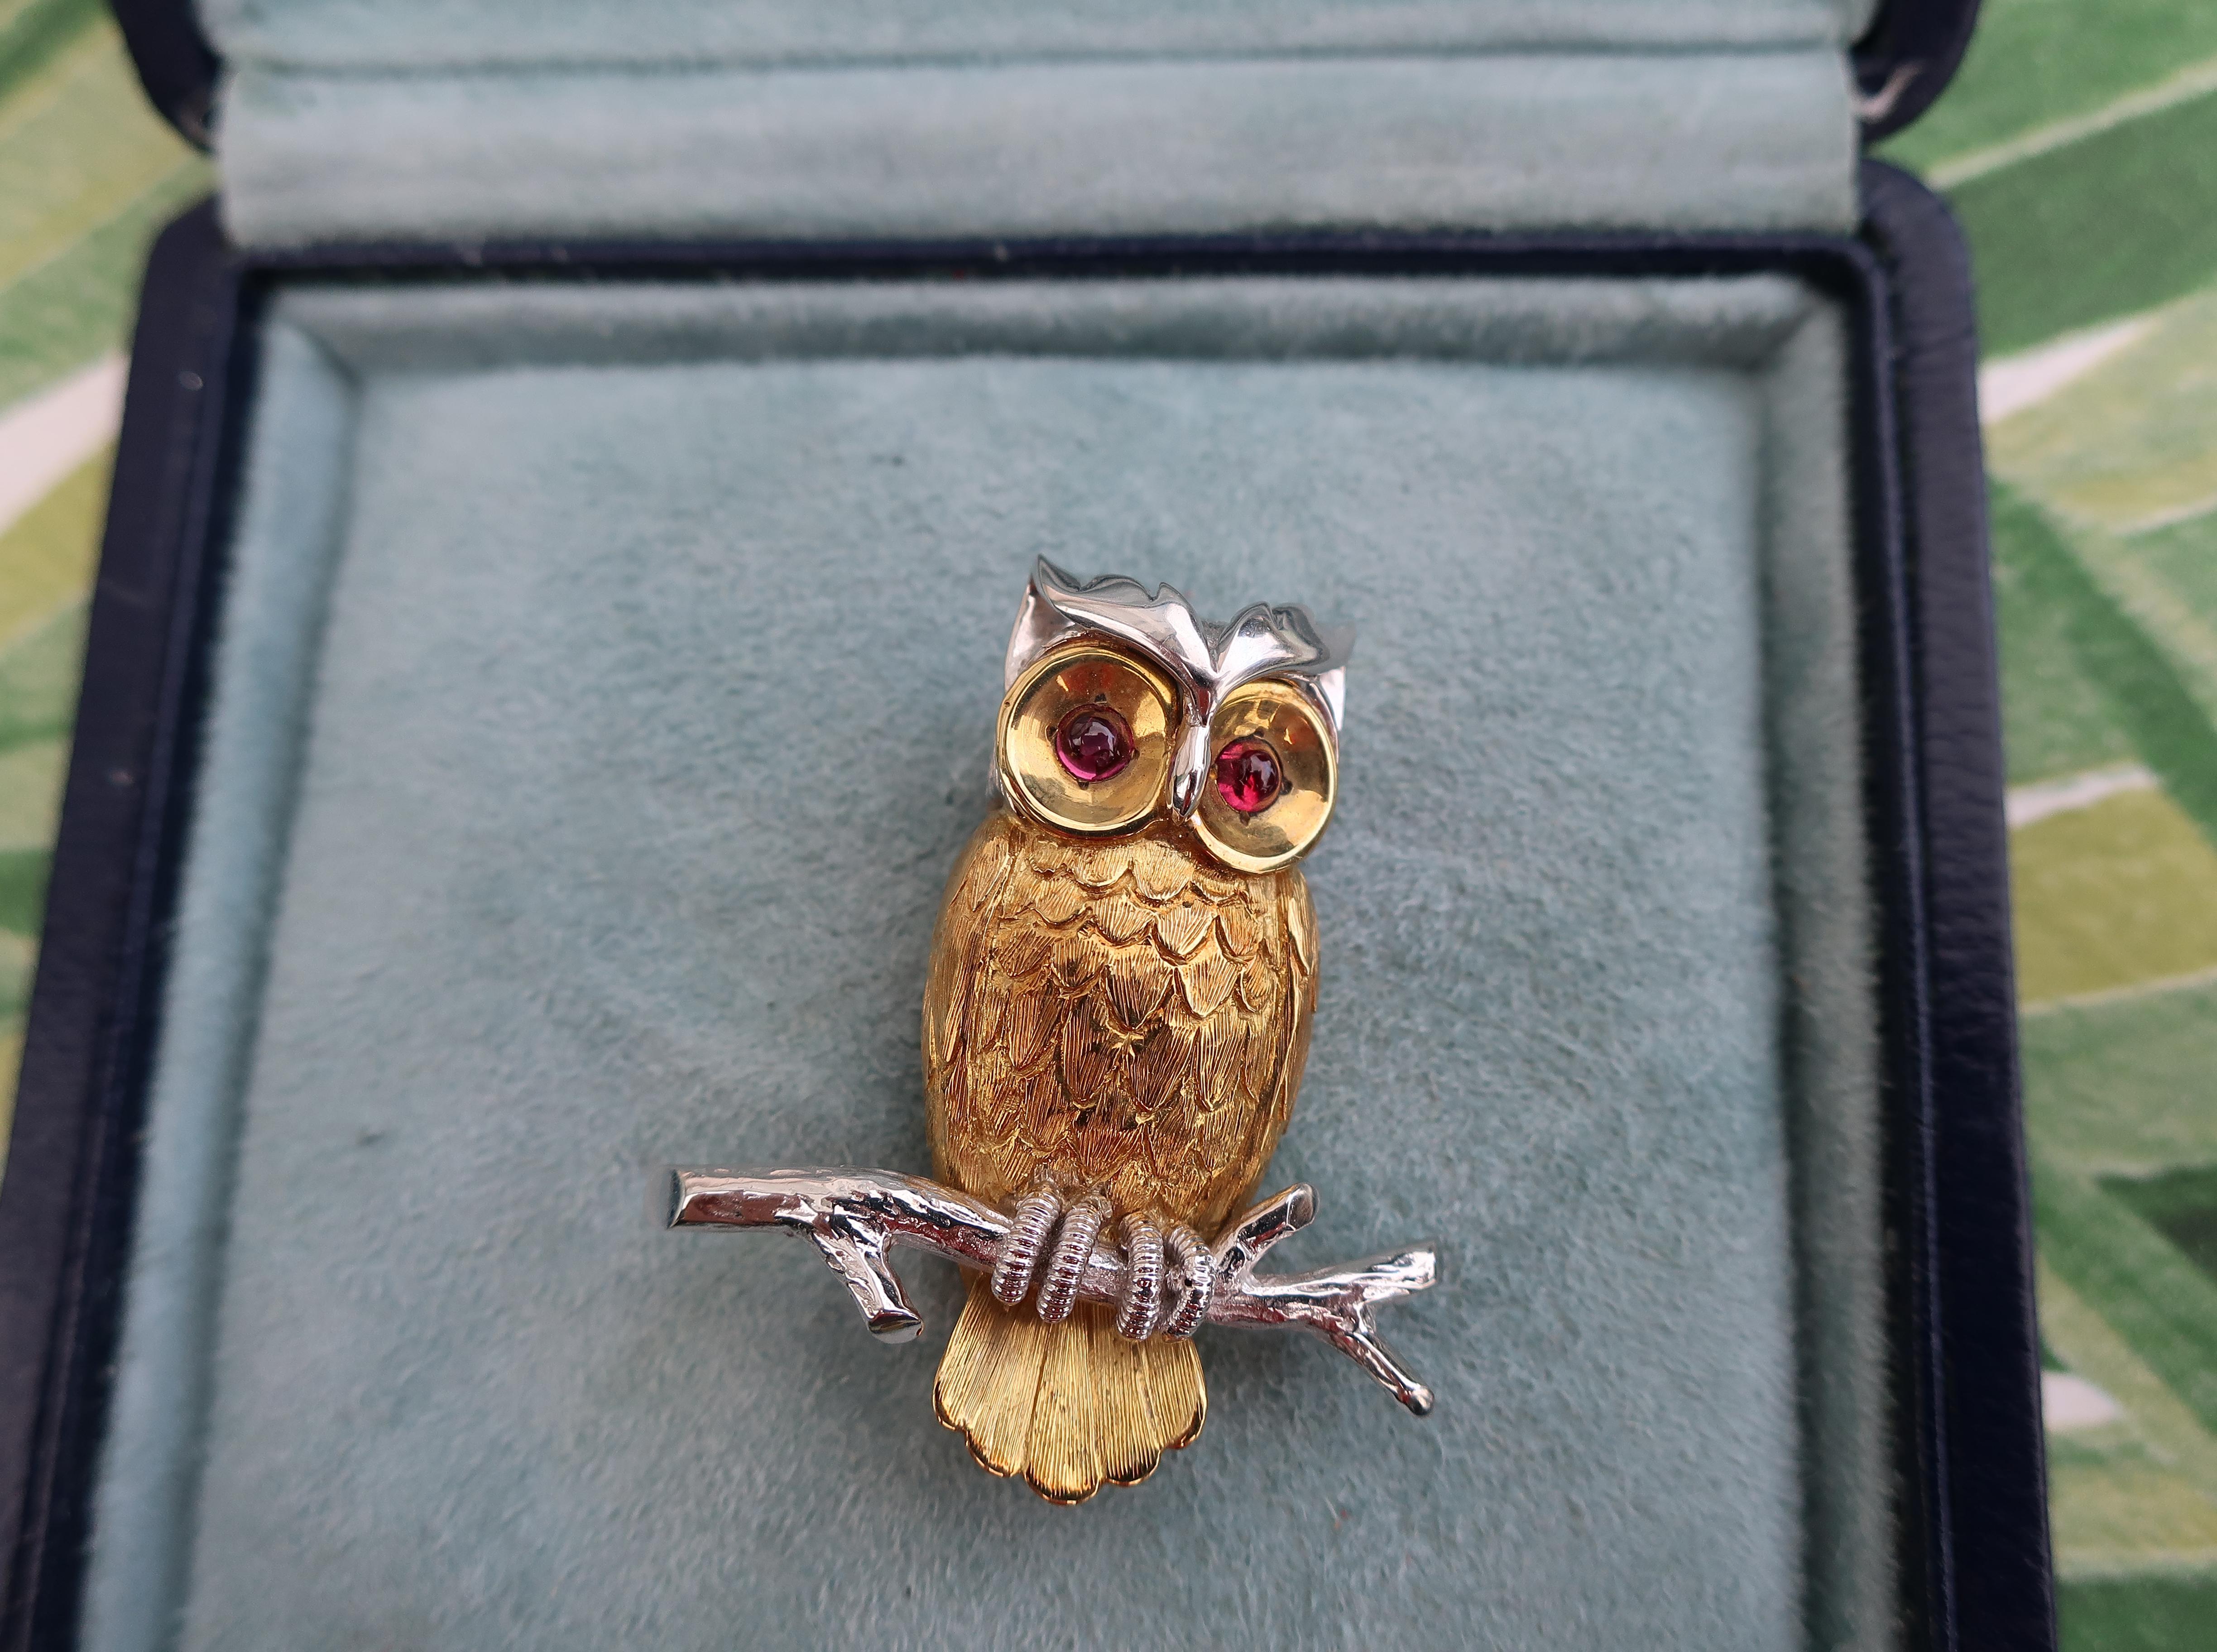 Contemporary 18 Karat Gold Owl Brooch with Ruby Eyes